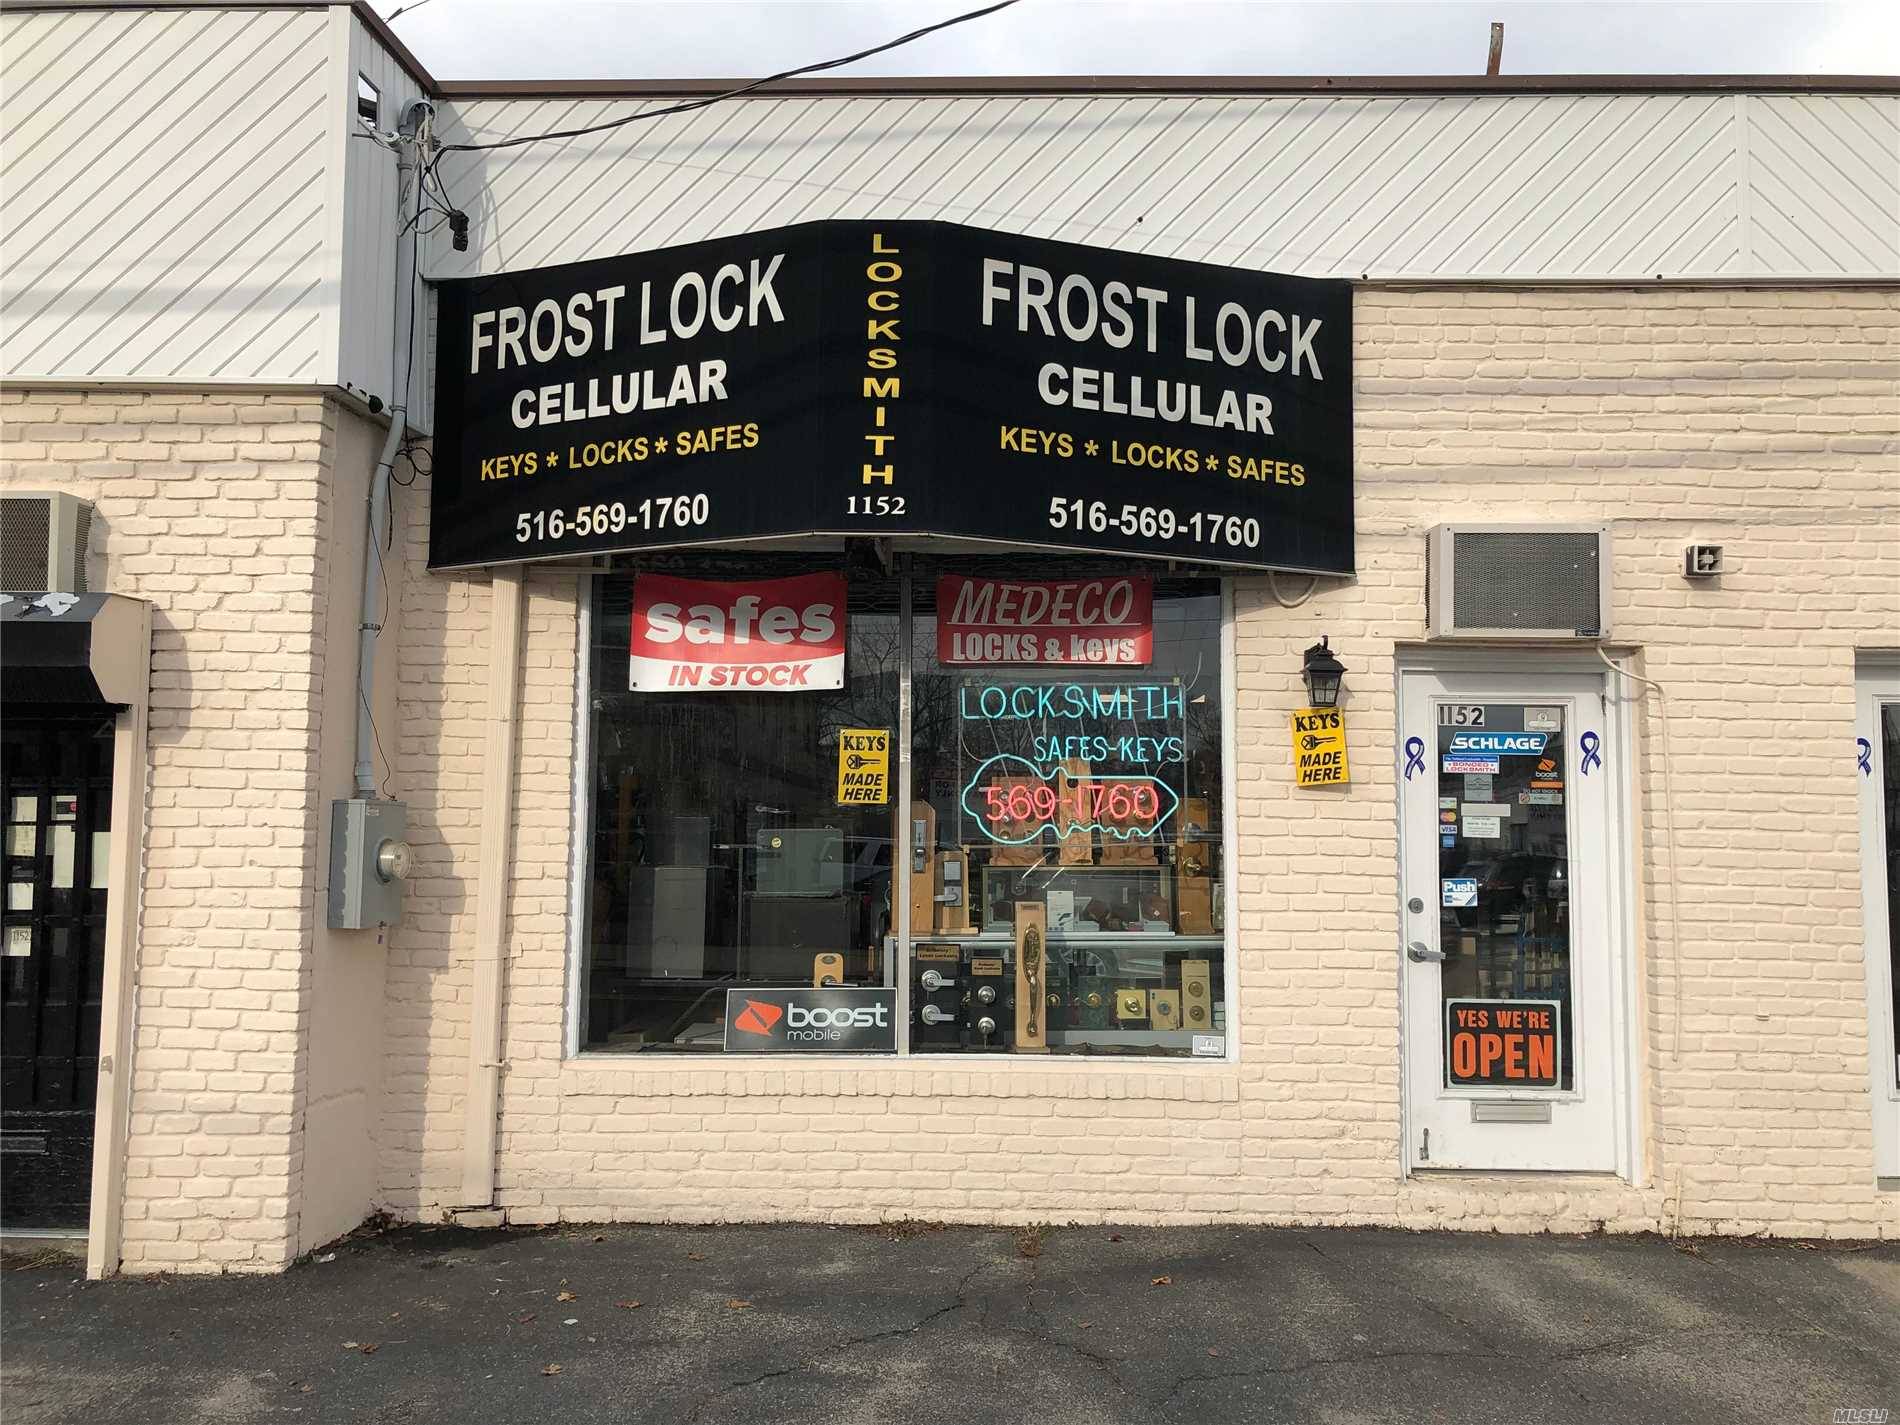 Broadway Is The Perfect Location For A Business Considering First Lock Has Been Thriving For 40 Years By The Same Owner.